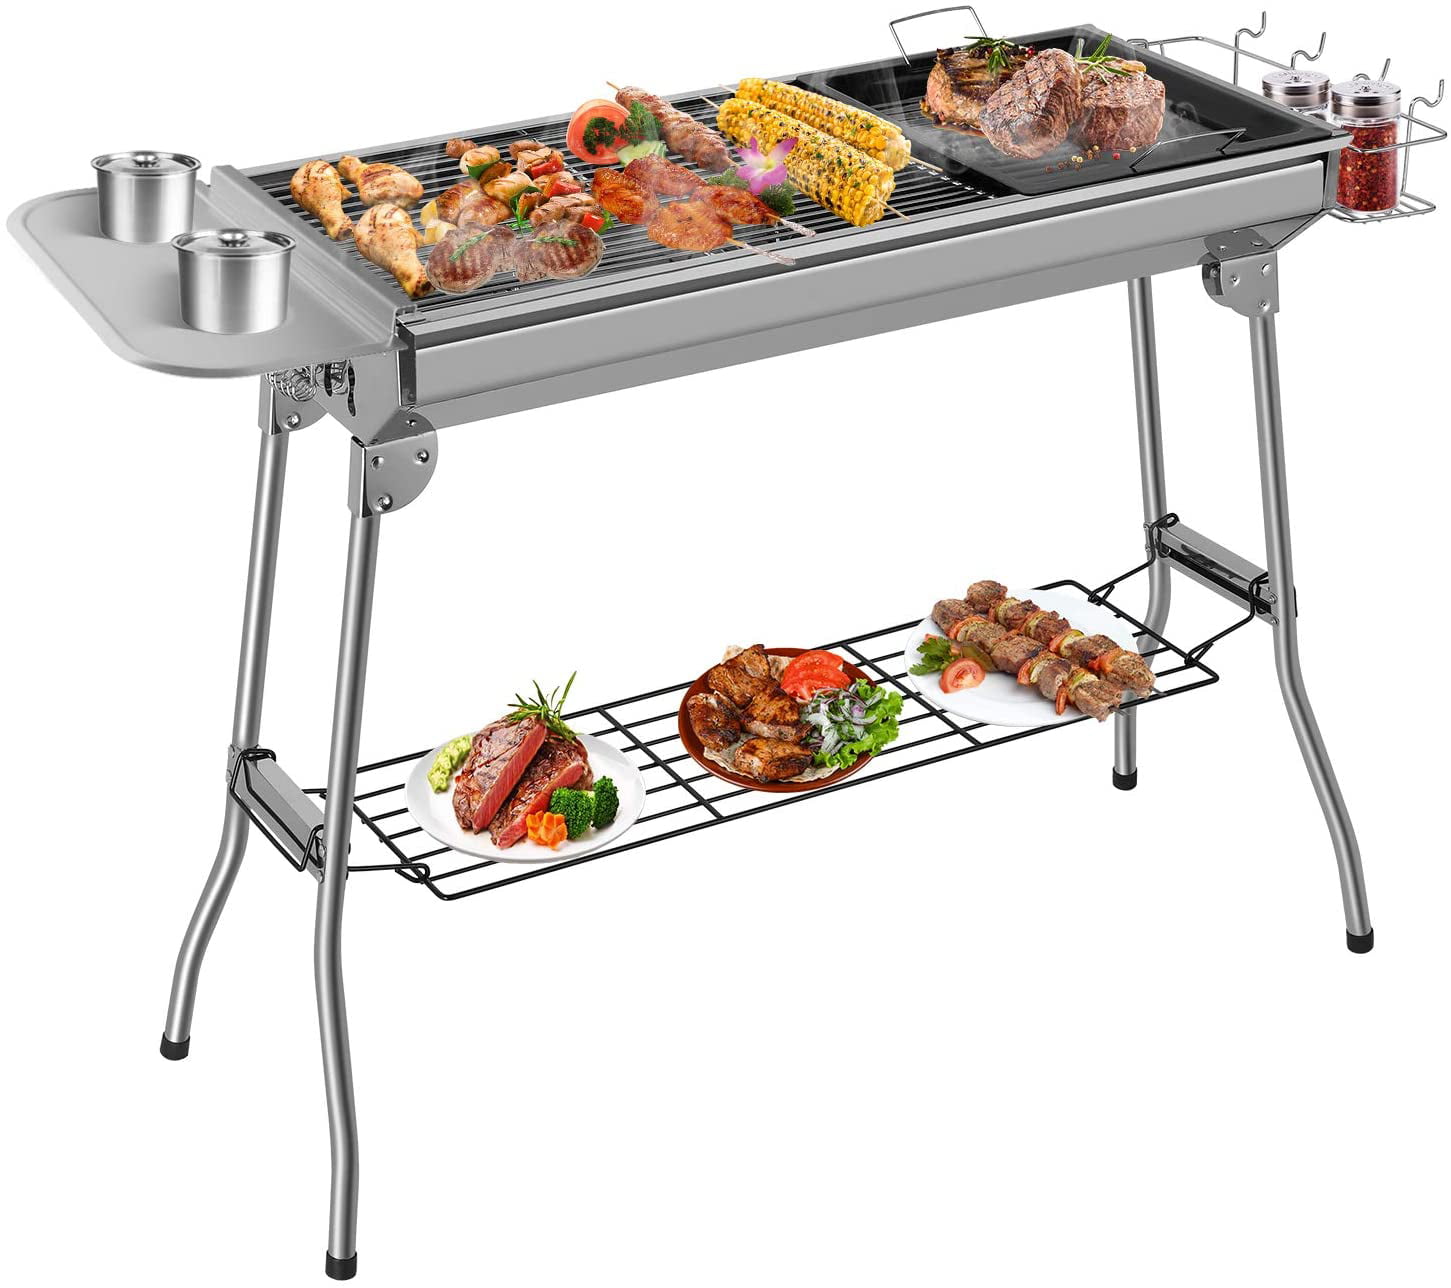 BBQ Charcoal Grill Barbecue Foldable Portable Garden Outdoor Travel Picnic UK 